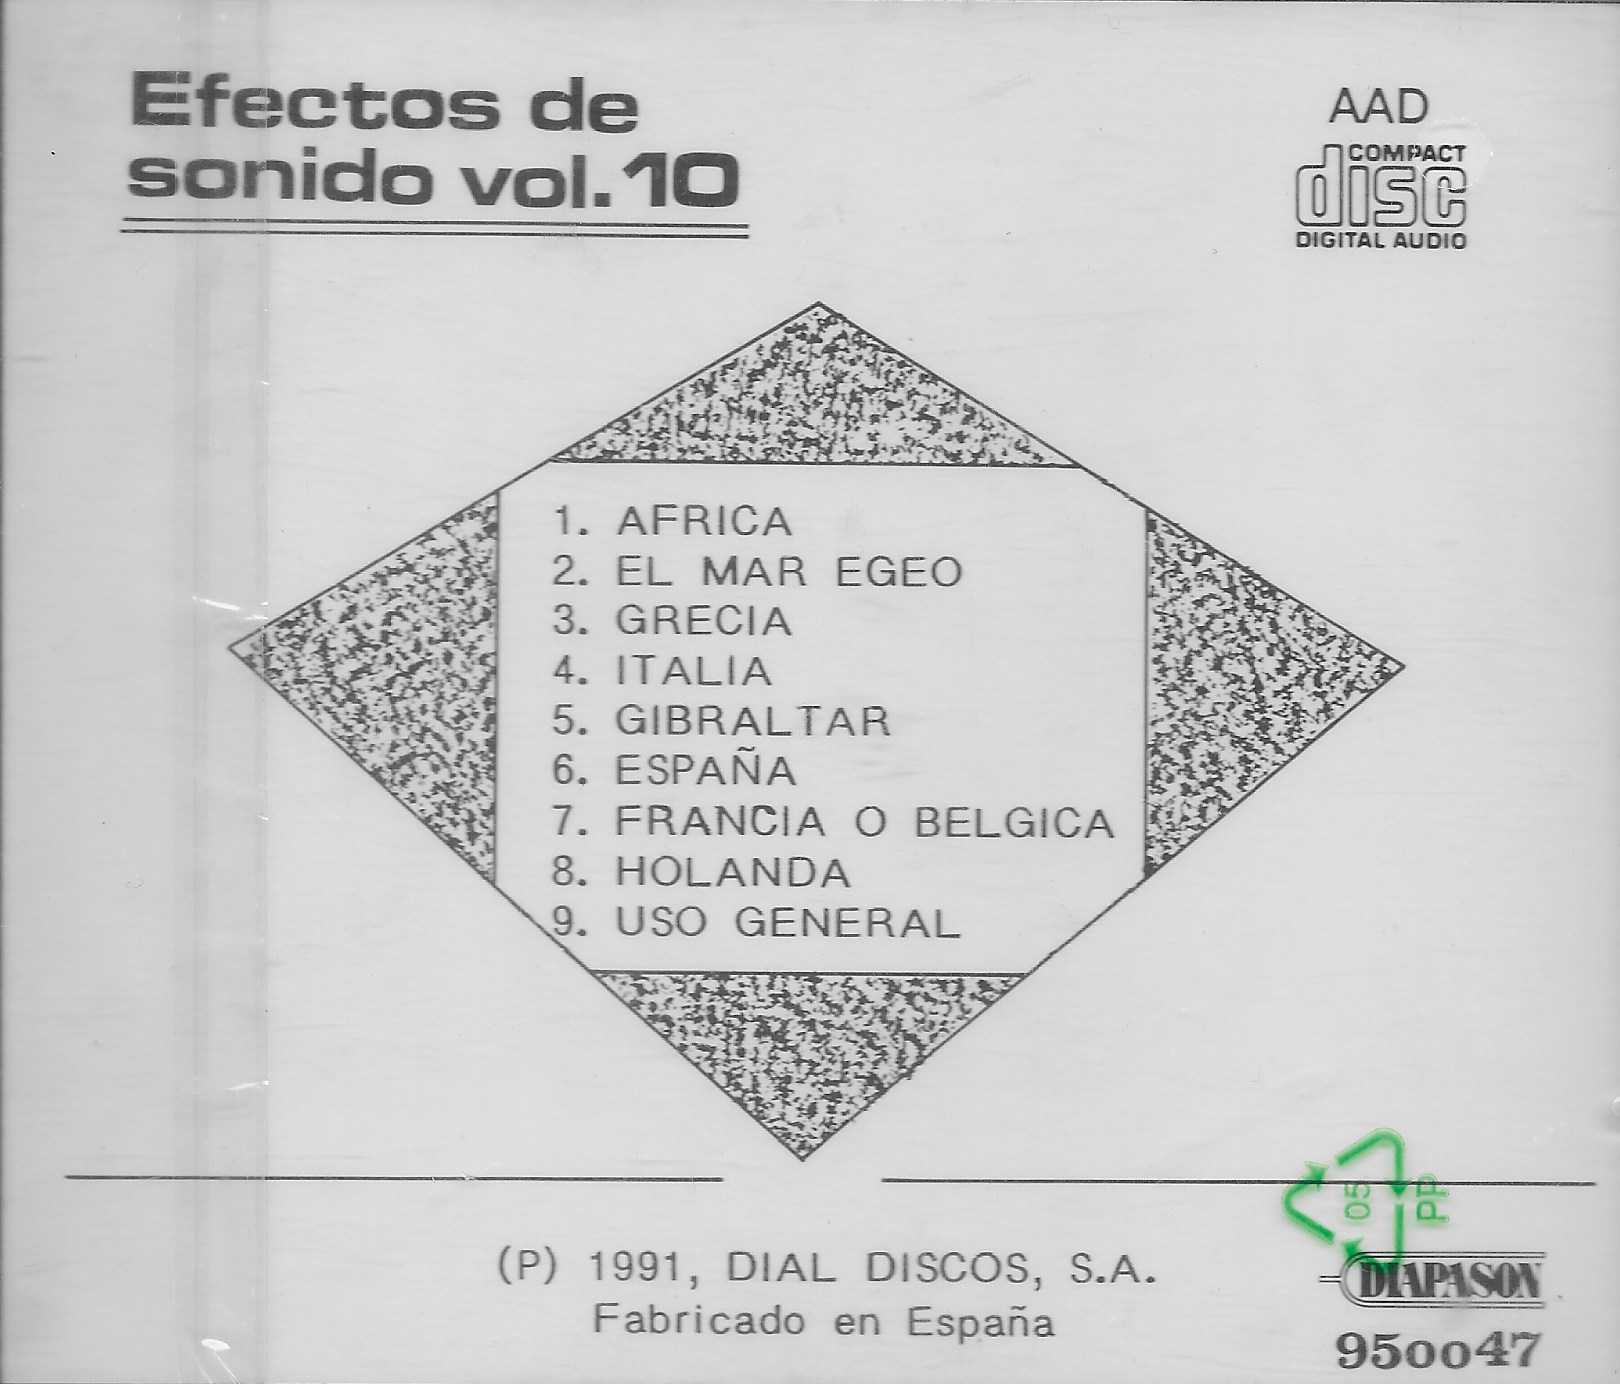 Picture of 95 0047 Effectos de sonido - Volume 10 by artist Various from the BBC records and Tapes library